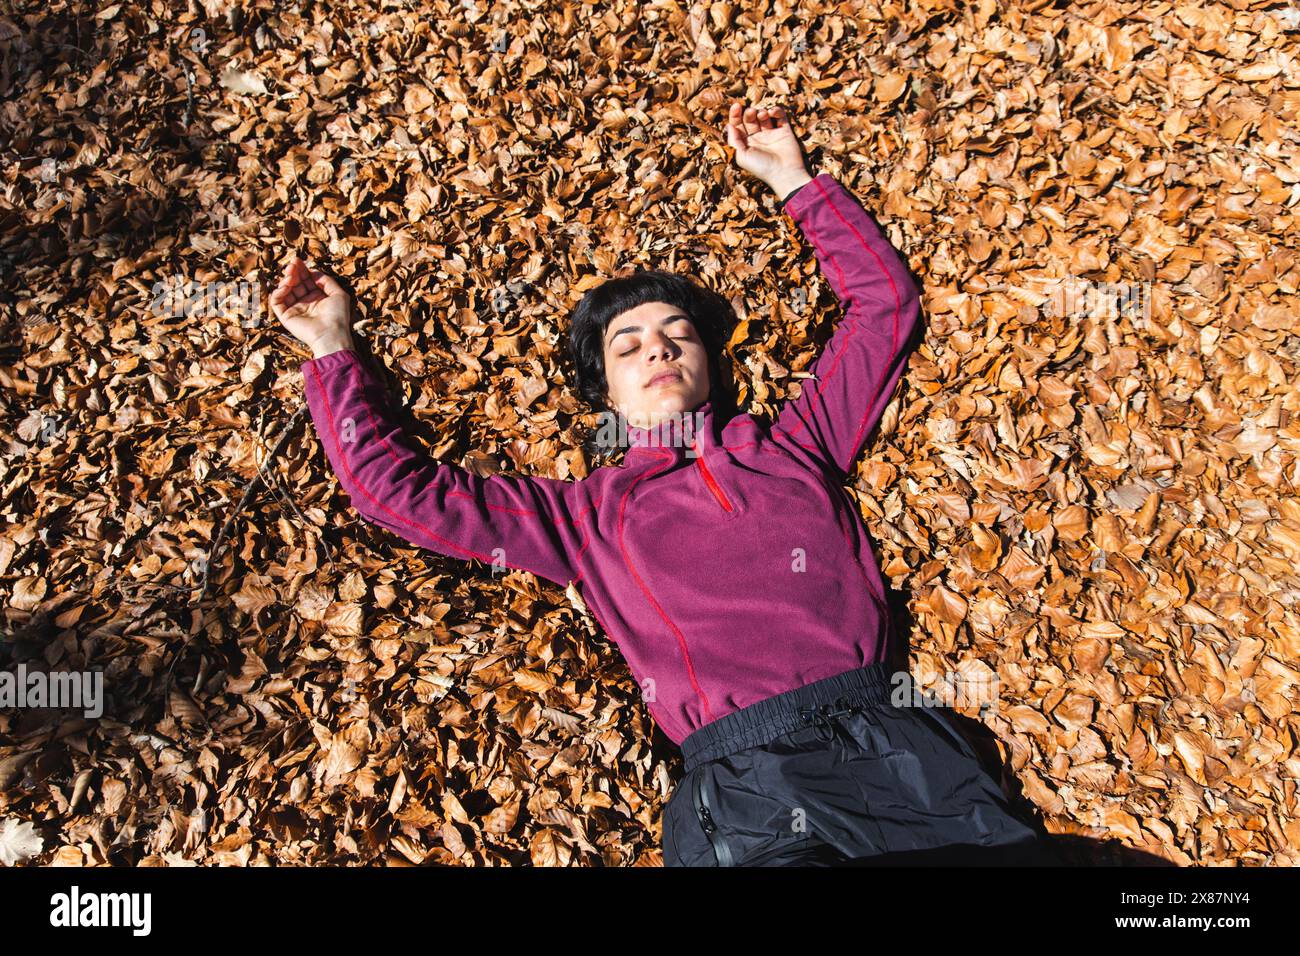 Carefree woman lying down on autumn leaves Stock Photo